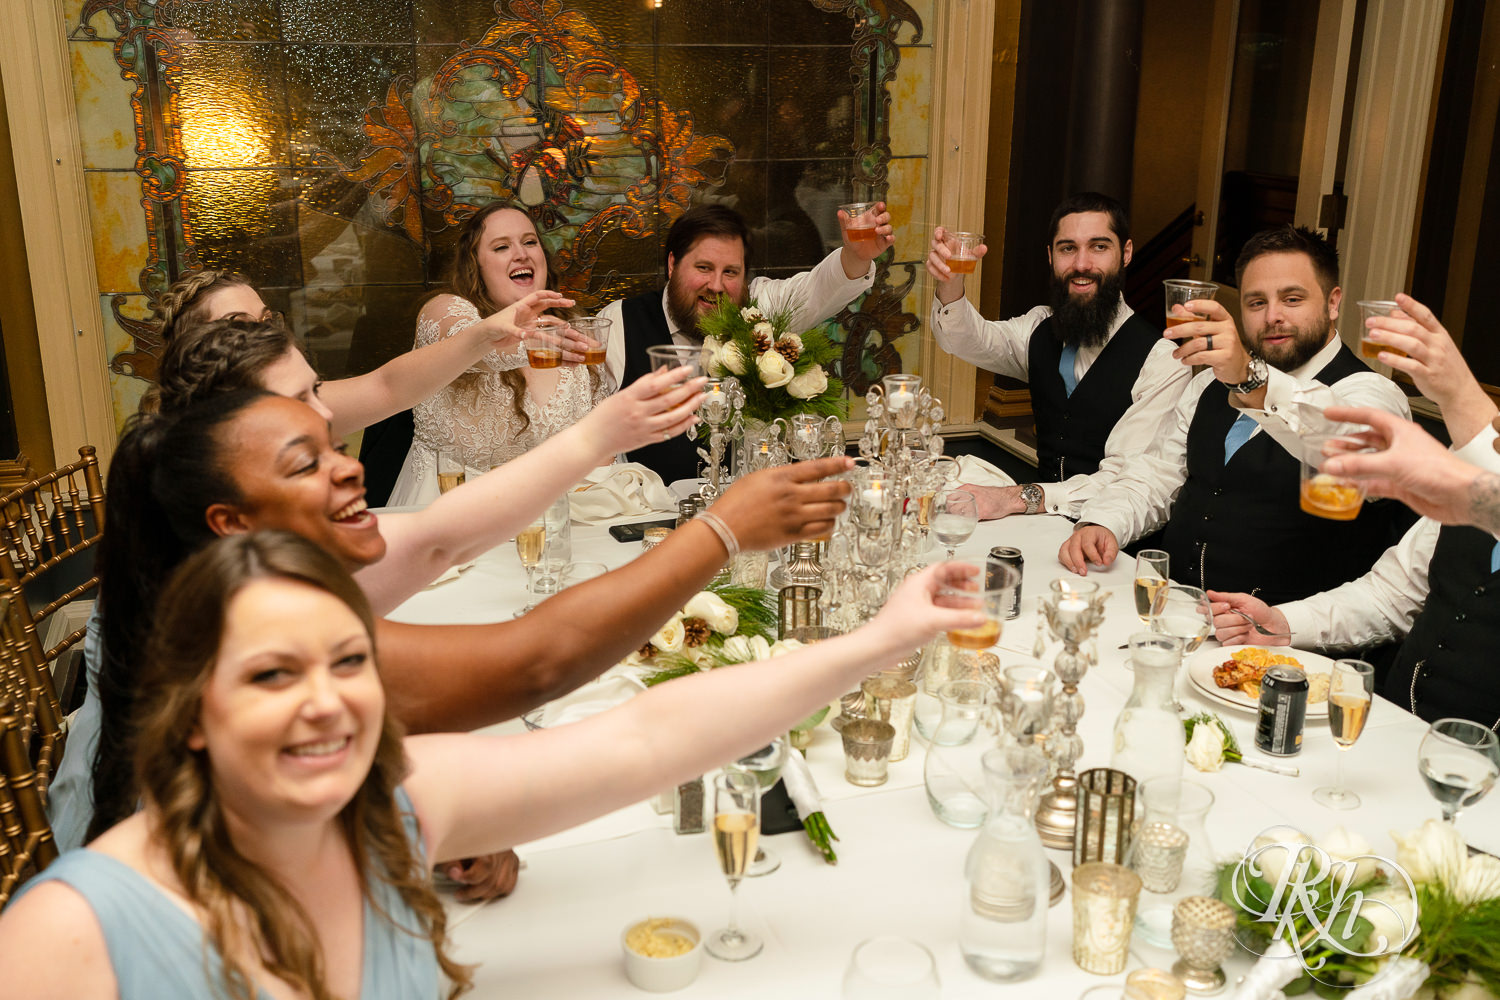 Wedding party toasts during speeches at Semple Mansion in Minneapolis, Minnesota.